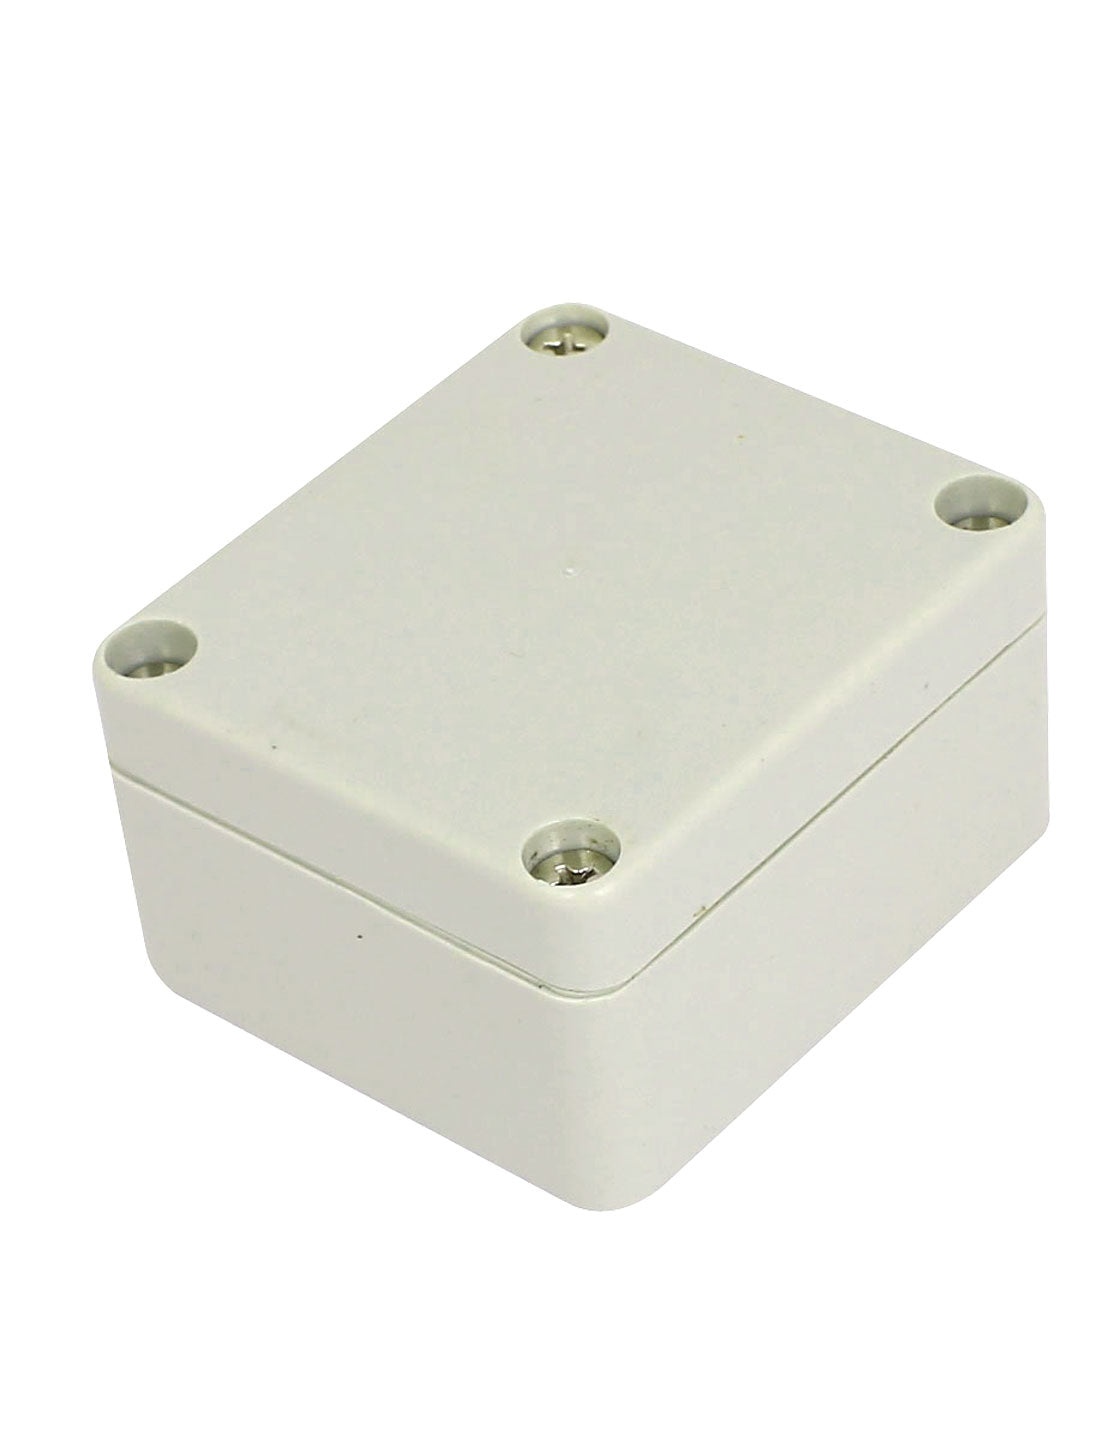 uxcell Uxcell 64mm x 57mm x 35mm Dustproof IP65 Sealed DIY Joint Electrical Junction Box